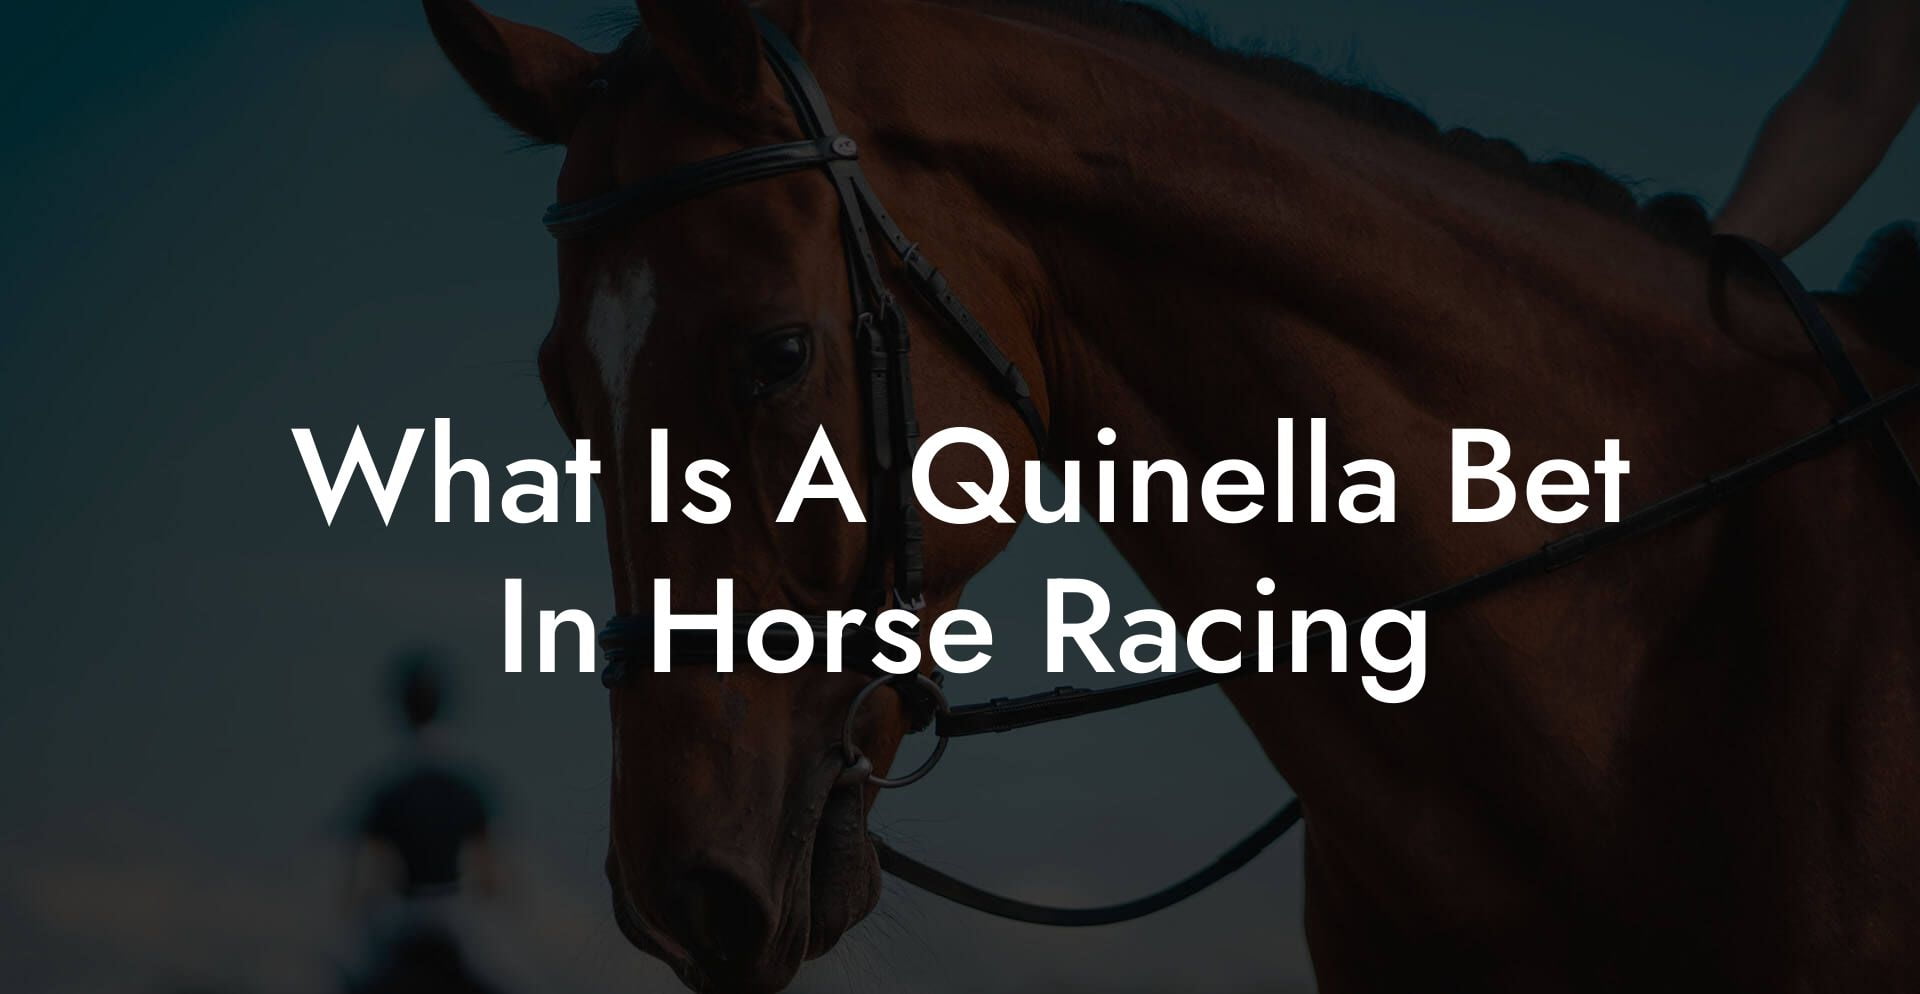 What Is A Quinella Bet In Horse Racing